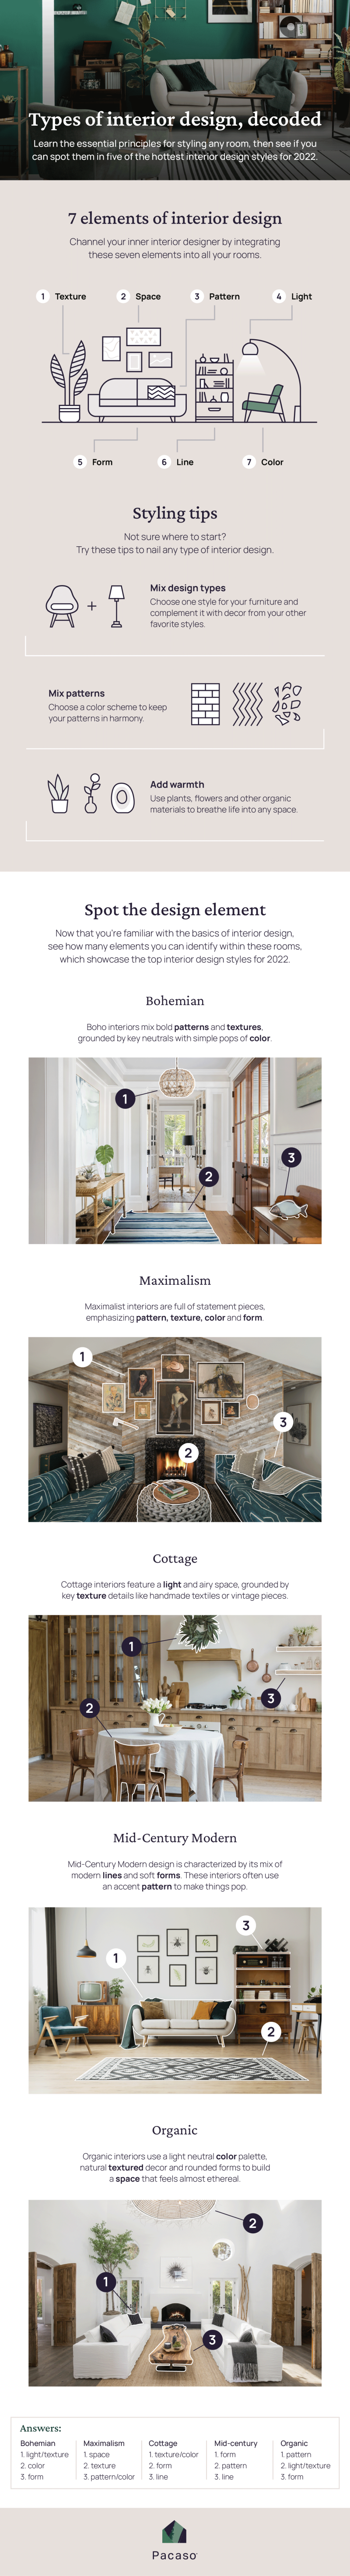 Pacaso infographic about interior design styles trending in 2022 and the seven elements of interior design 